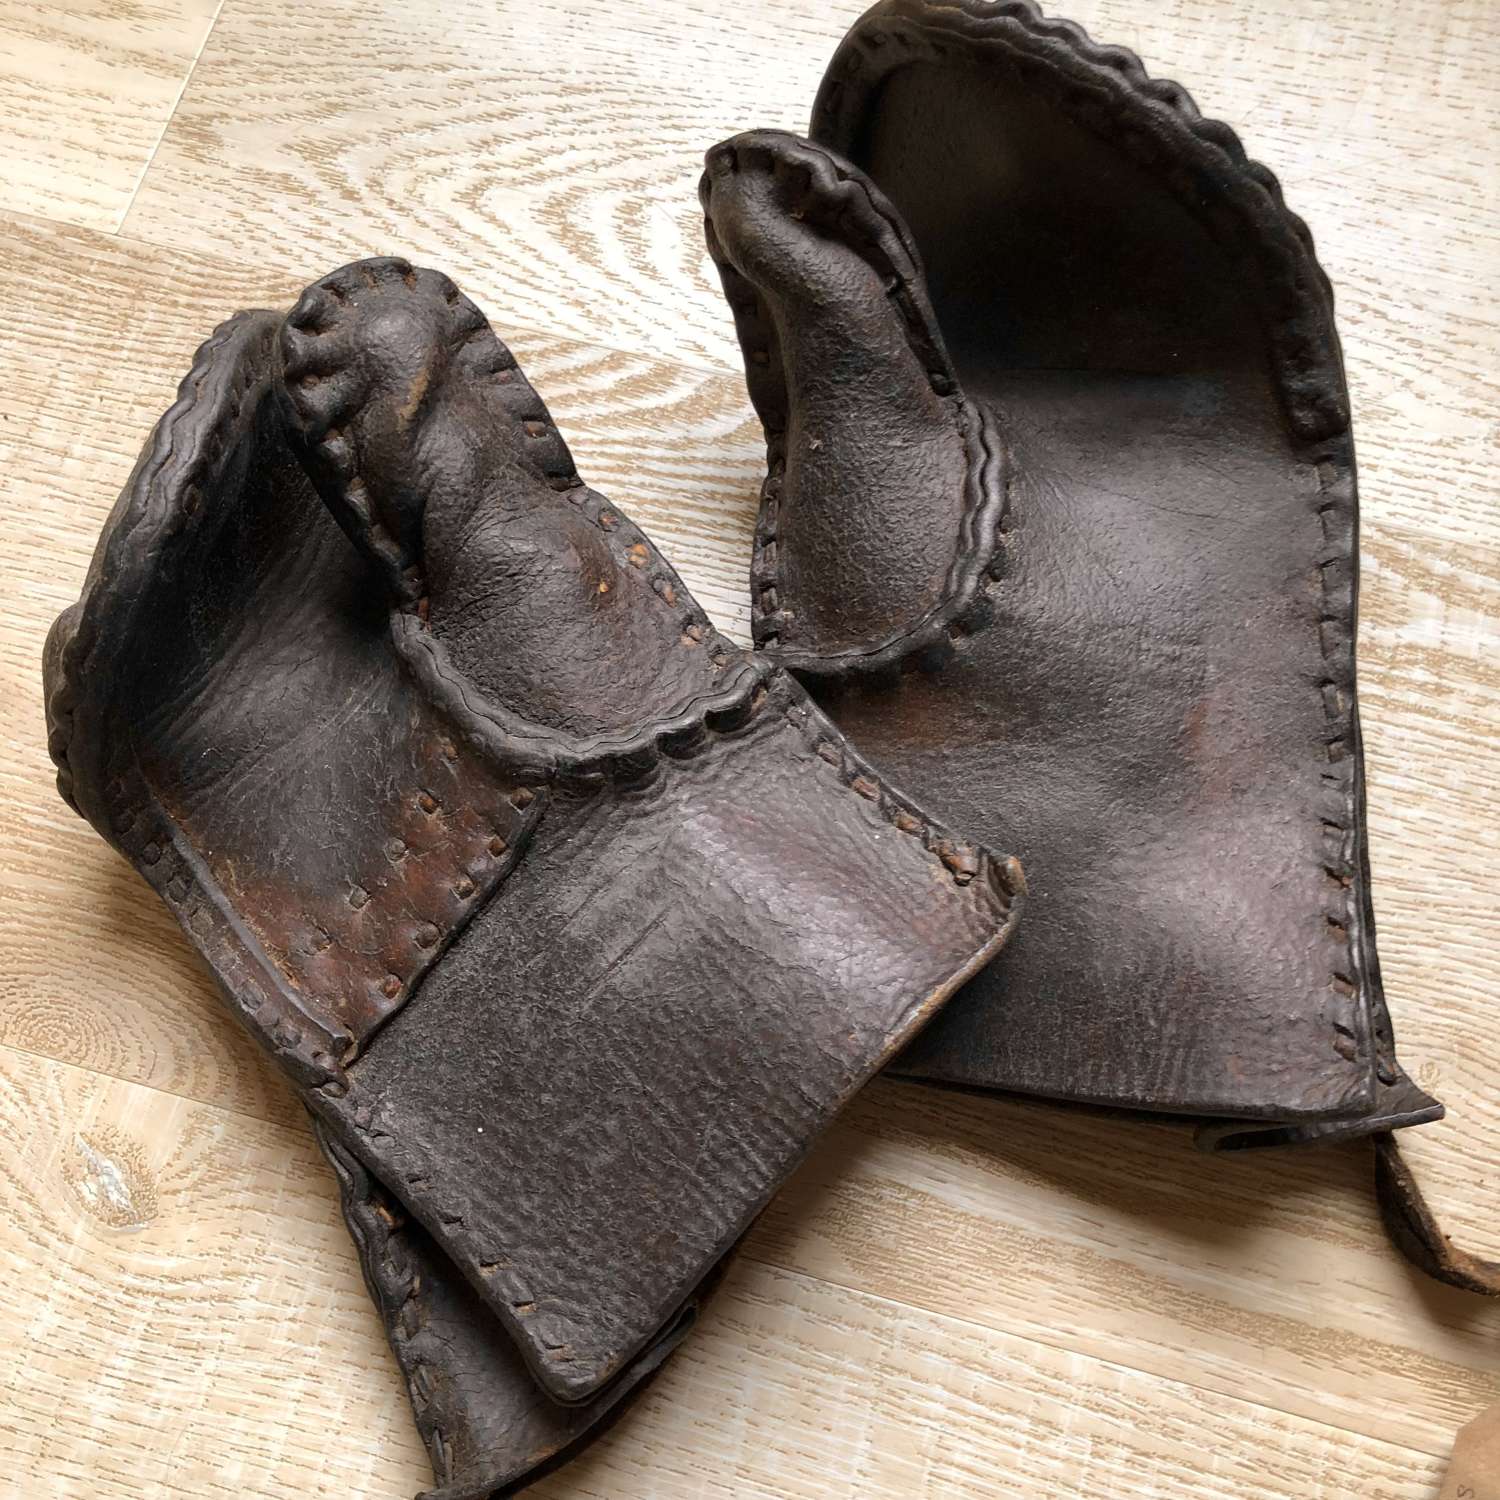 Pair of Early Hedge Layer's Mittens